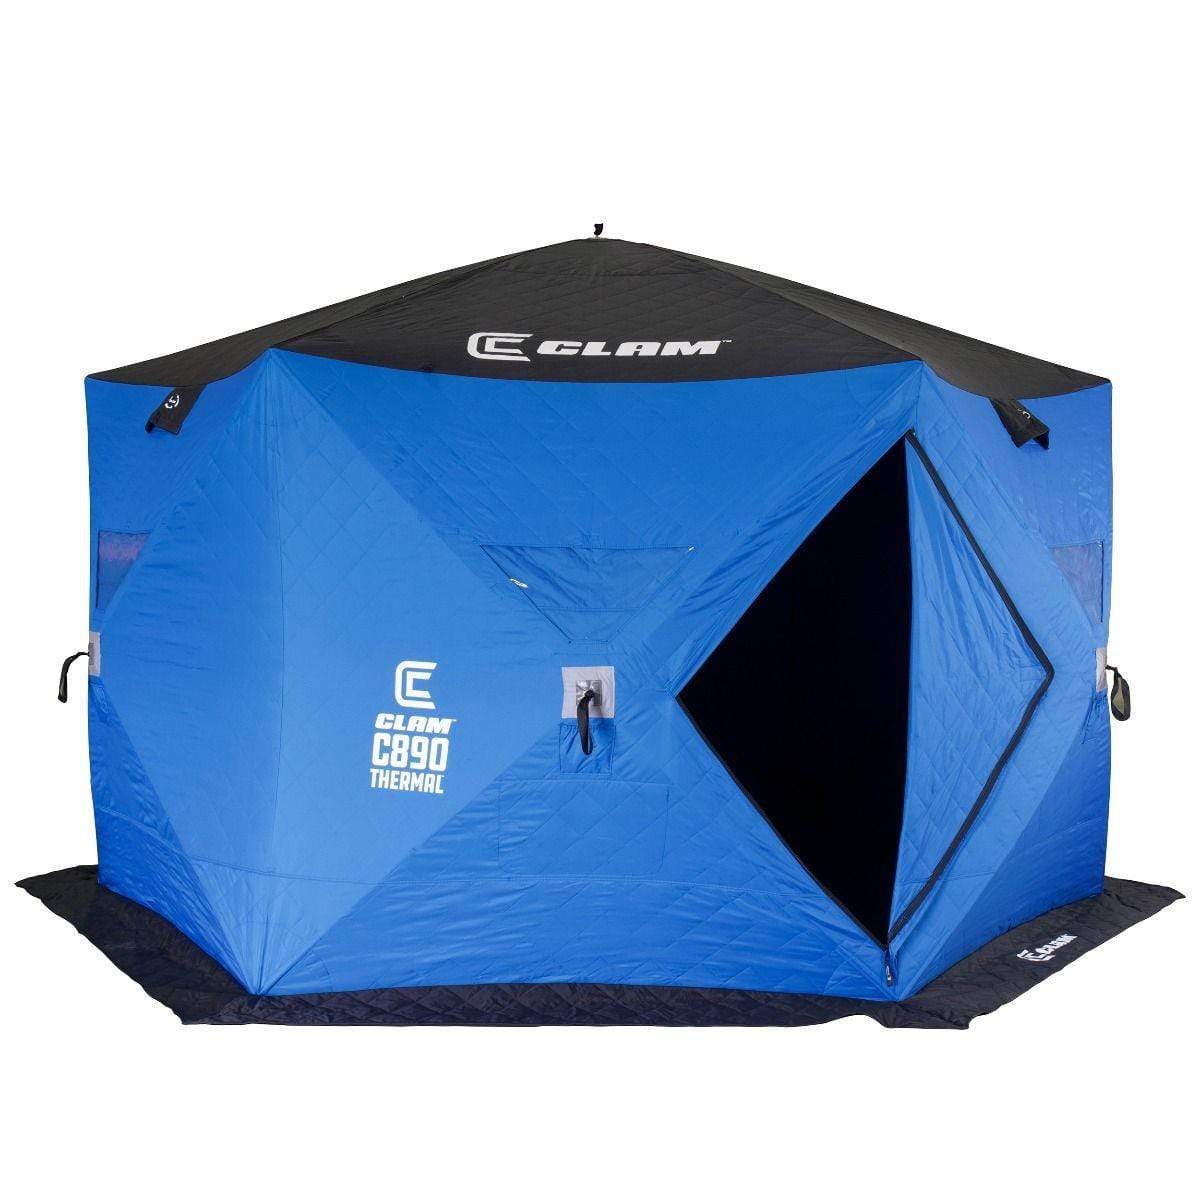 Clam Hub C890 Thermal Pop Up Shelter